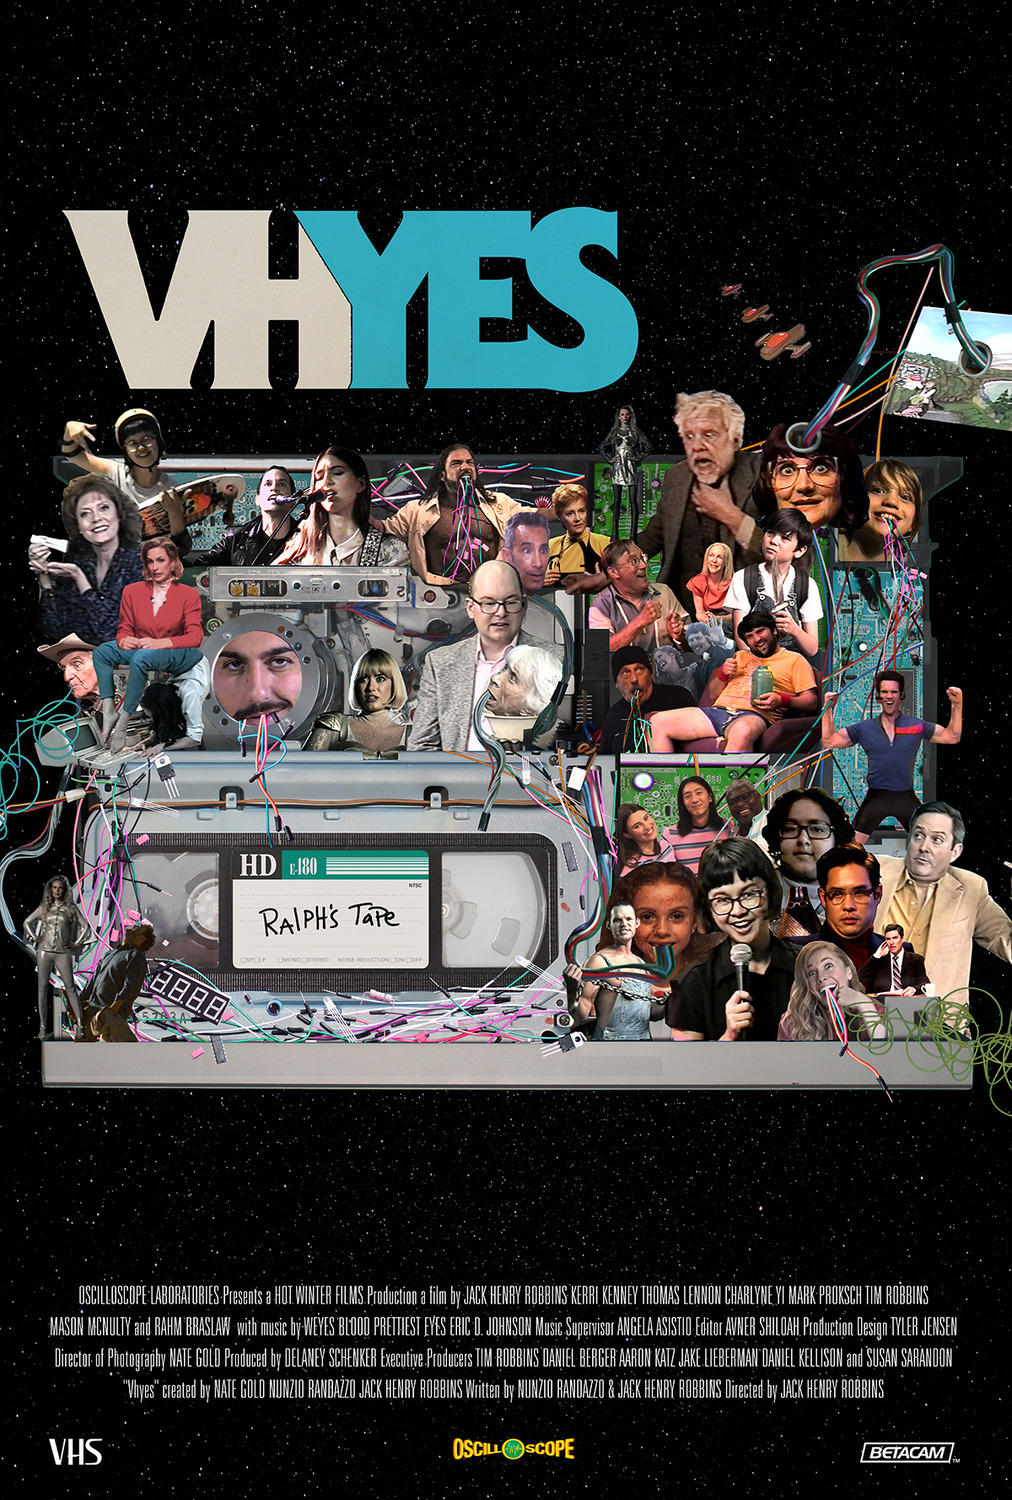 Extra Large Movie Poster Image for VHYes 